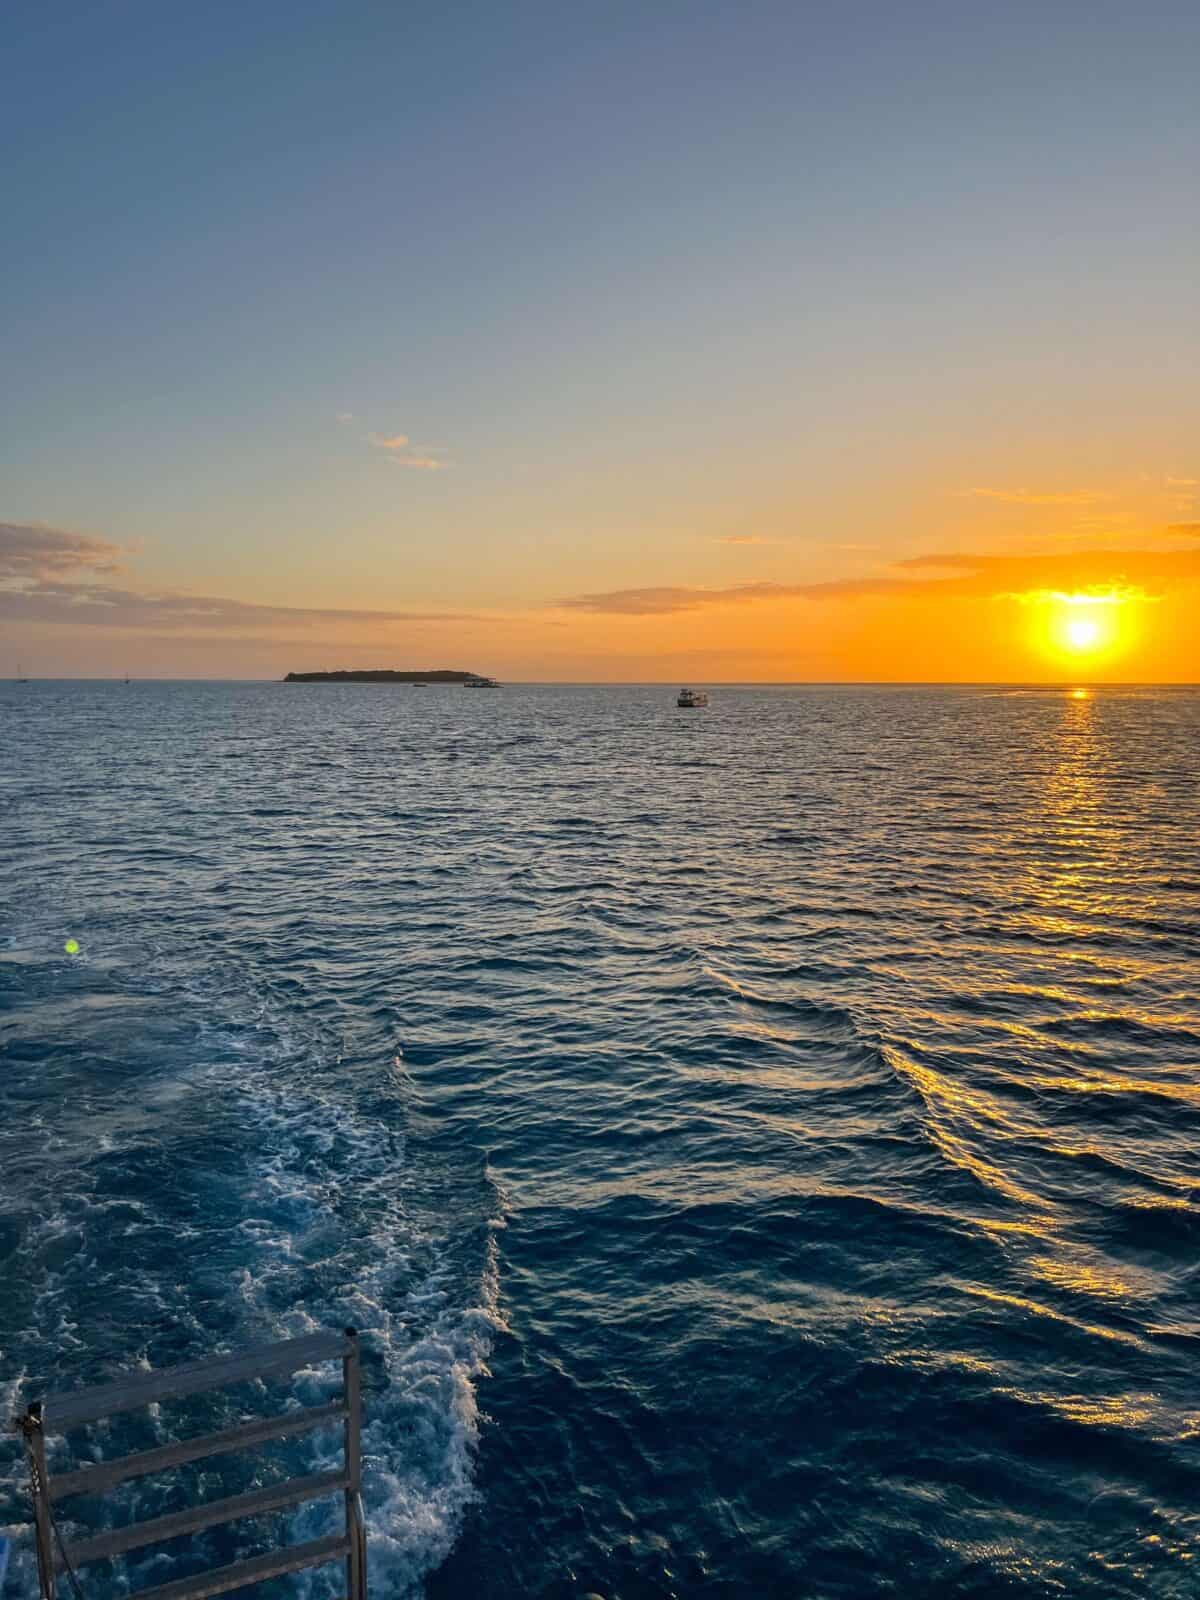 lady Musgrave island sunset. 